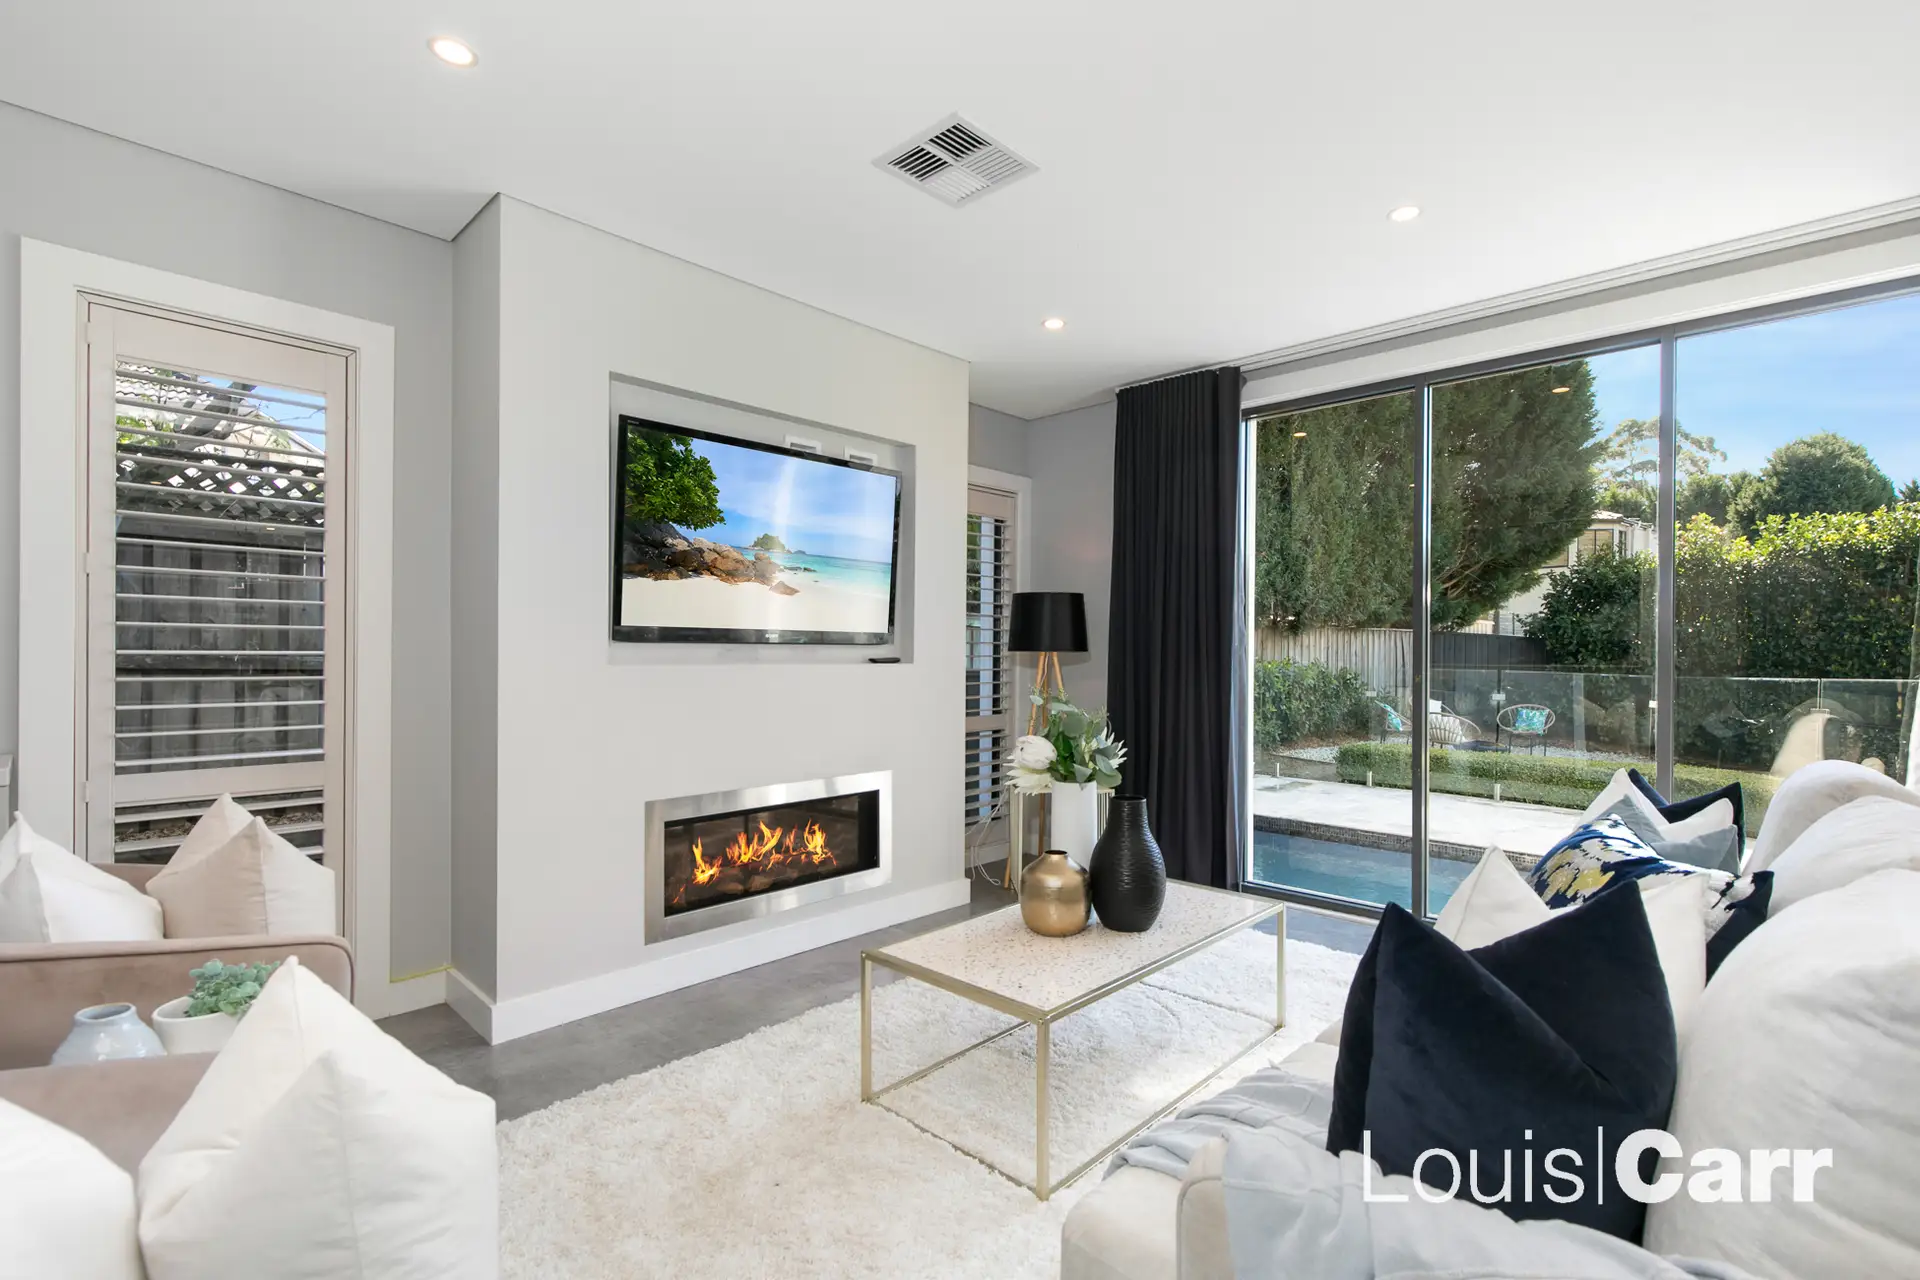 Photo #2: 10 Dalkeith Road, Cherrybrook - Sold by Louis Carr Real Estate